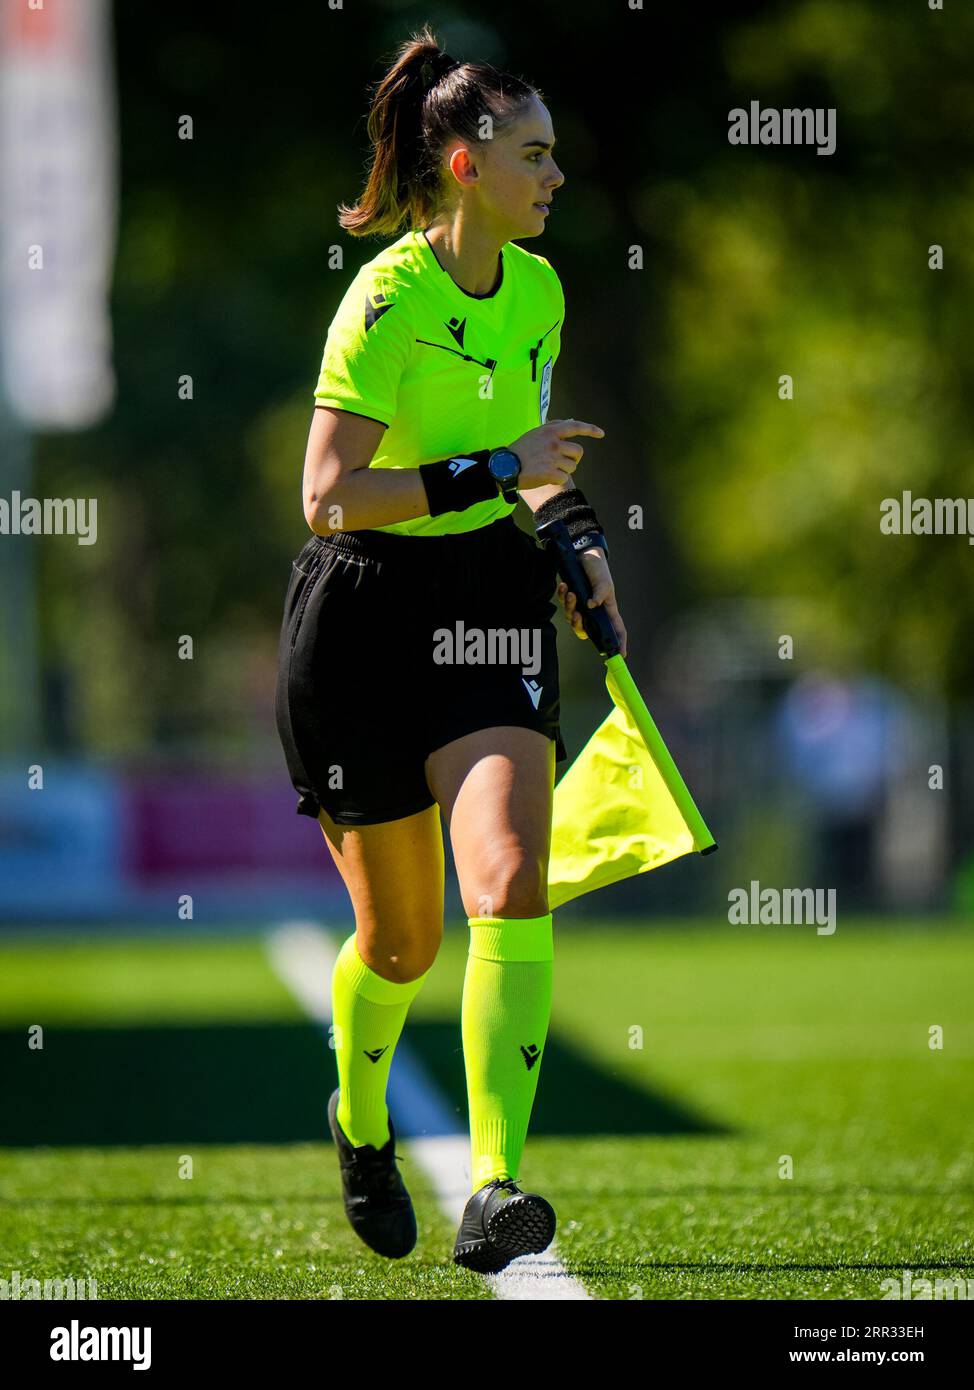 Enschede, Netherlands. 06th Sep, 2023. ENSCHEDE, NETHERLANDS - SEPTEMBER 6: Assistant Referee Edjena Kapxhiu during the UEFA Women's Champions League LP Group 1 Semi Final match between Levante UD and Stjarnan at the Sportpark Schreurserve on September 6, 2023 in Enschede, Netherlands (Photo by Rene Nijhuis/BSR Agency) Credit: BSR Agency/Alamy Live News Stock Photo